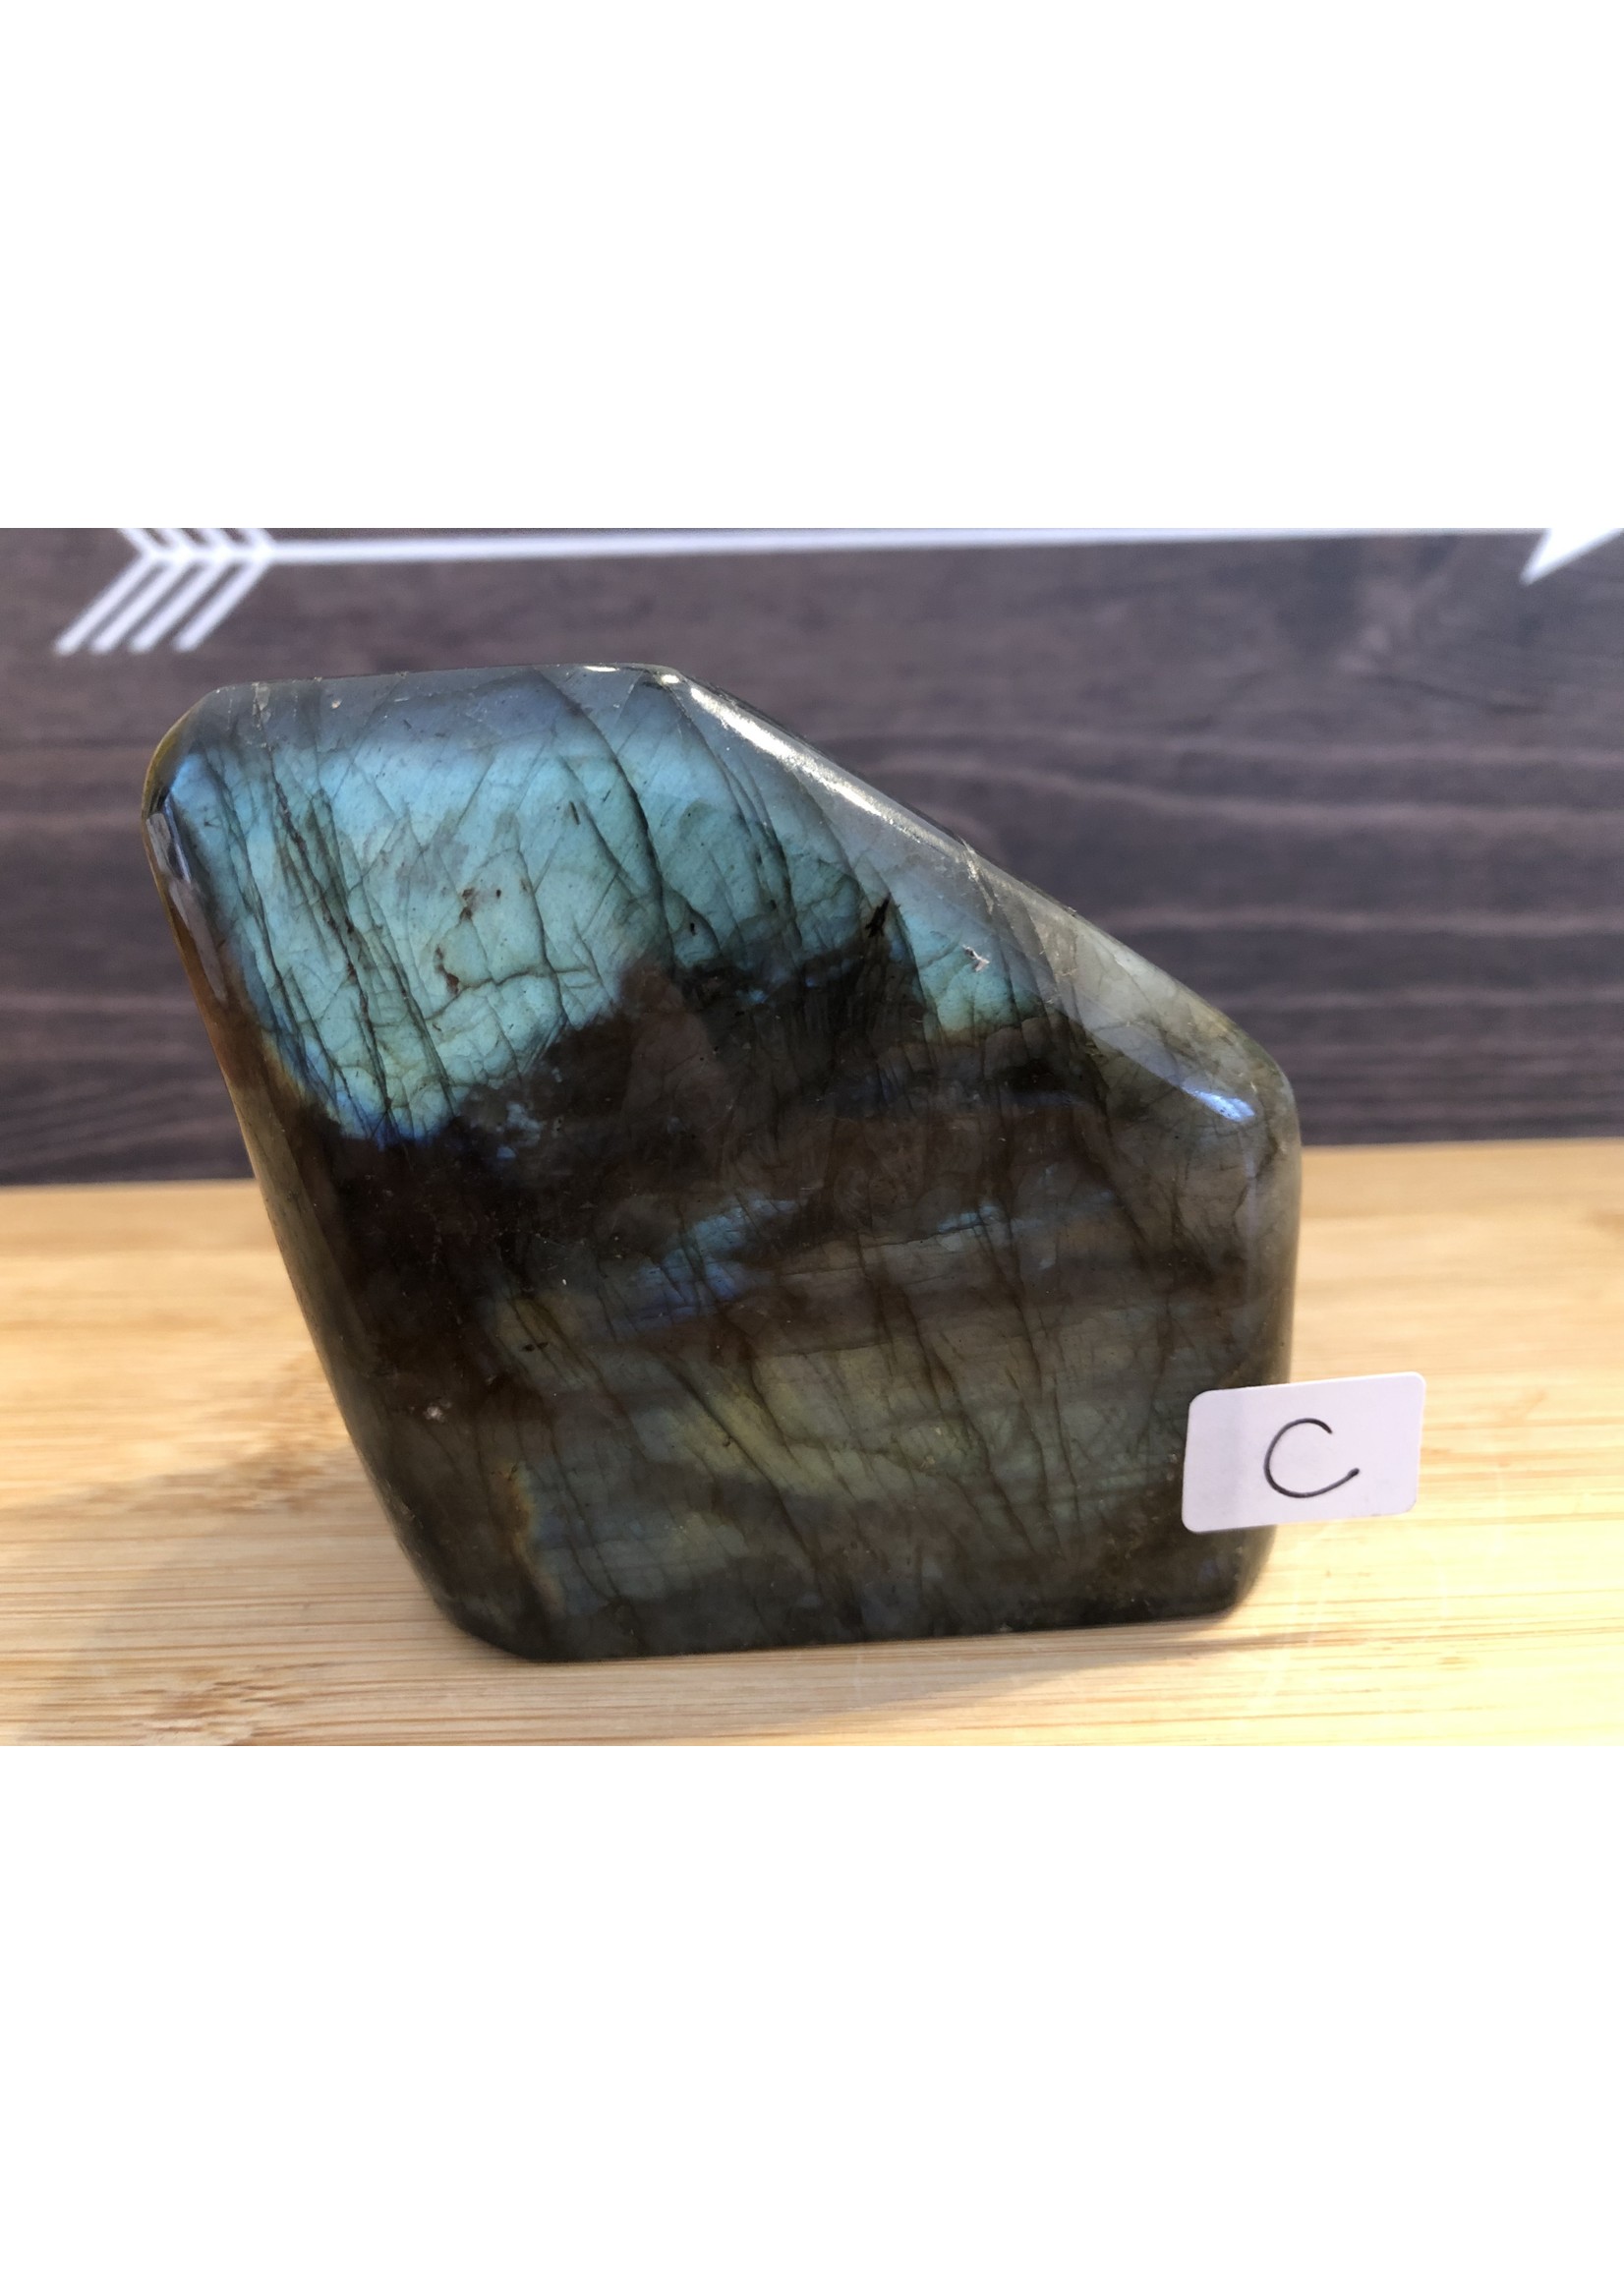 hexagonal labradorite freeform, natural labradorite, excellent for strengthening intuition-promoting psychic abilities